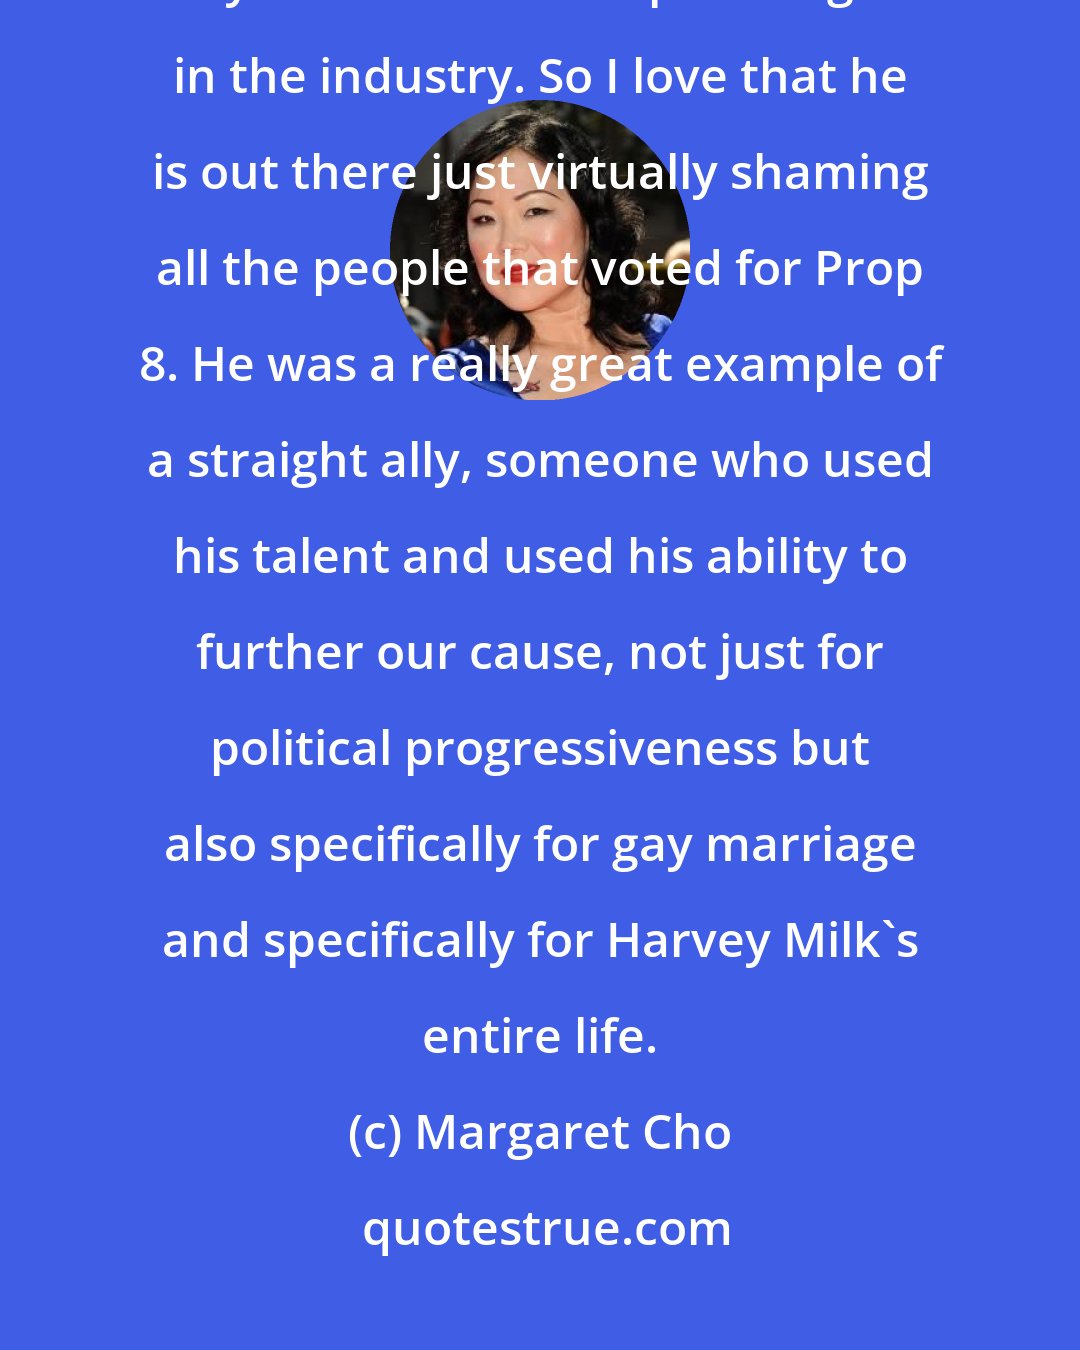 Margaret Cho: People like Sean Penn, he is someone that is politically progressive and yet is still at the top of his game in the industry. So I love that he is out there just virtually shaming all the people that voted for Prop 8. He was a really great example of a straight ally, someone who used his talent and used his ability to further our cause, not just for political progressiveness but also specifically for gay marriage and specifically for Harvey Milk's entire life.